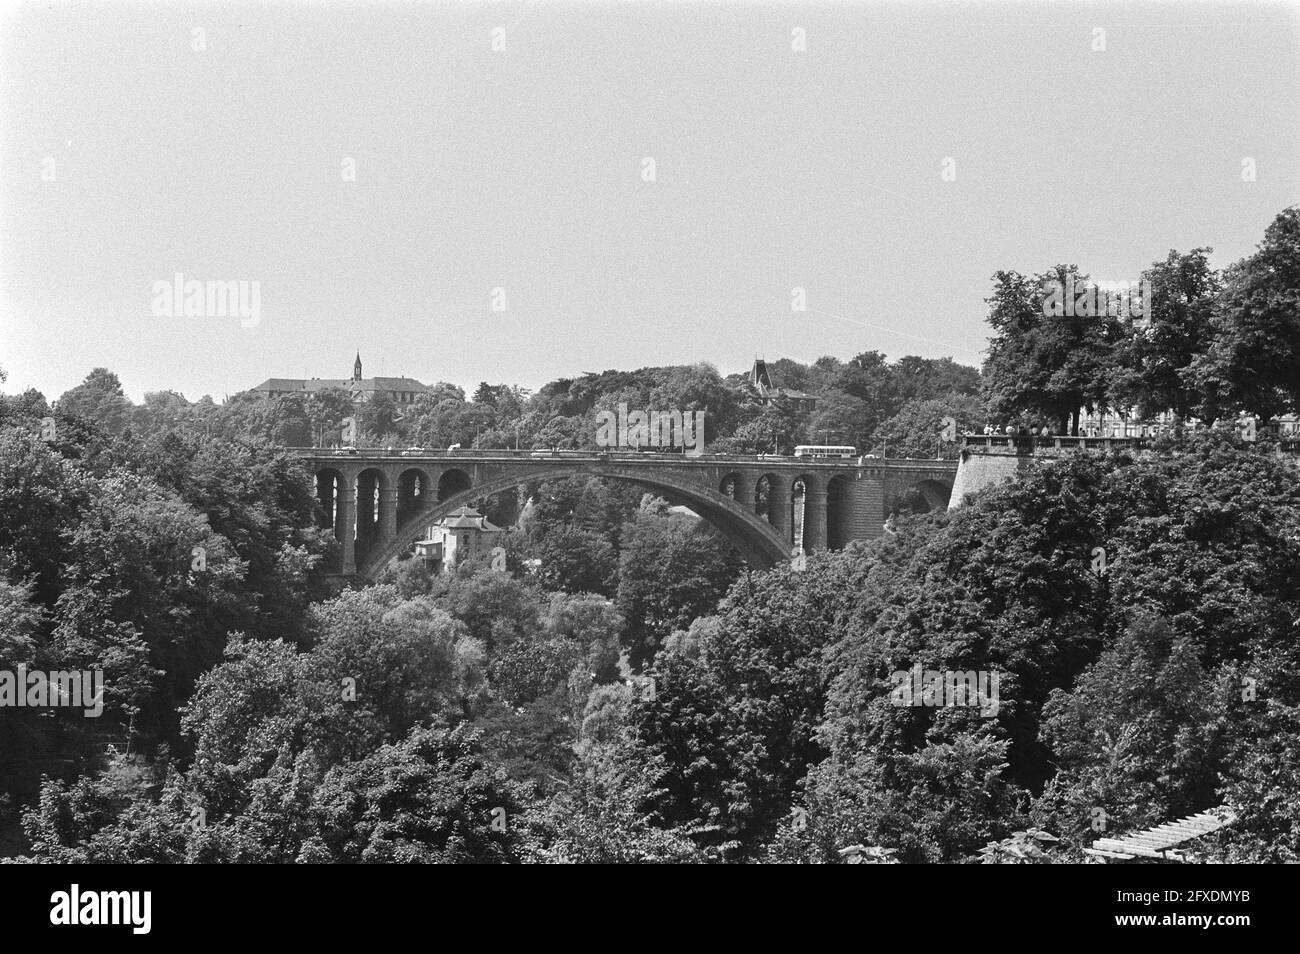 Cityscapes Luxembourg, no. 19A Viaduc over Vallee de la Petrusse, no. 21, 22 Vallee de la Petrusse, July 7, 1971, Cityscapes, The Netherlands, 20th century press agency photo, news to remember, documentary, historic photography 1945-1990, visual stories, human history of the Twentieth Century, capturing moments in time Stock Photo